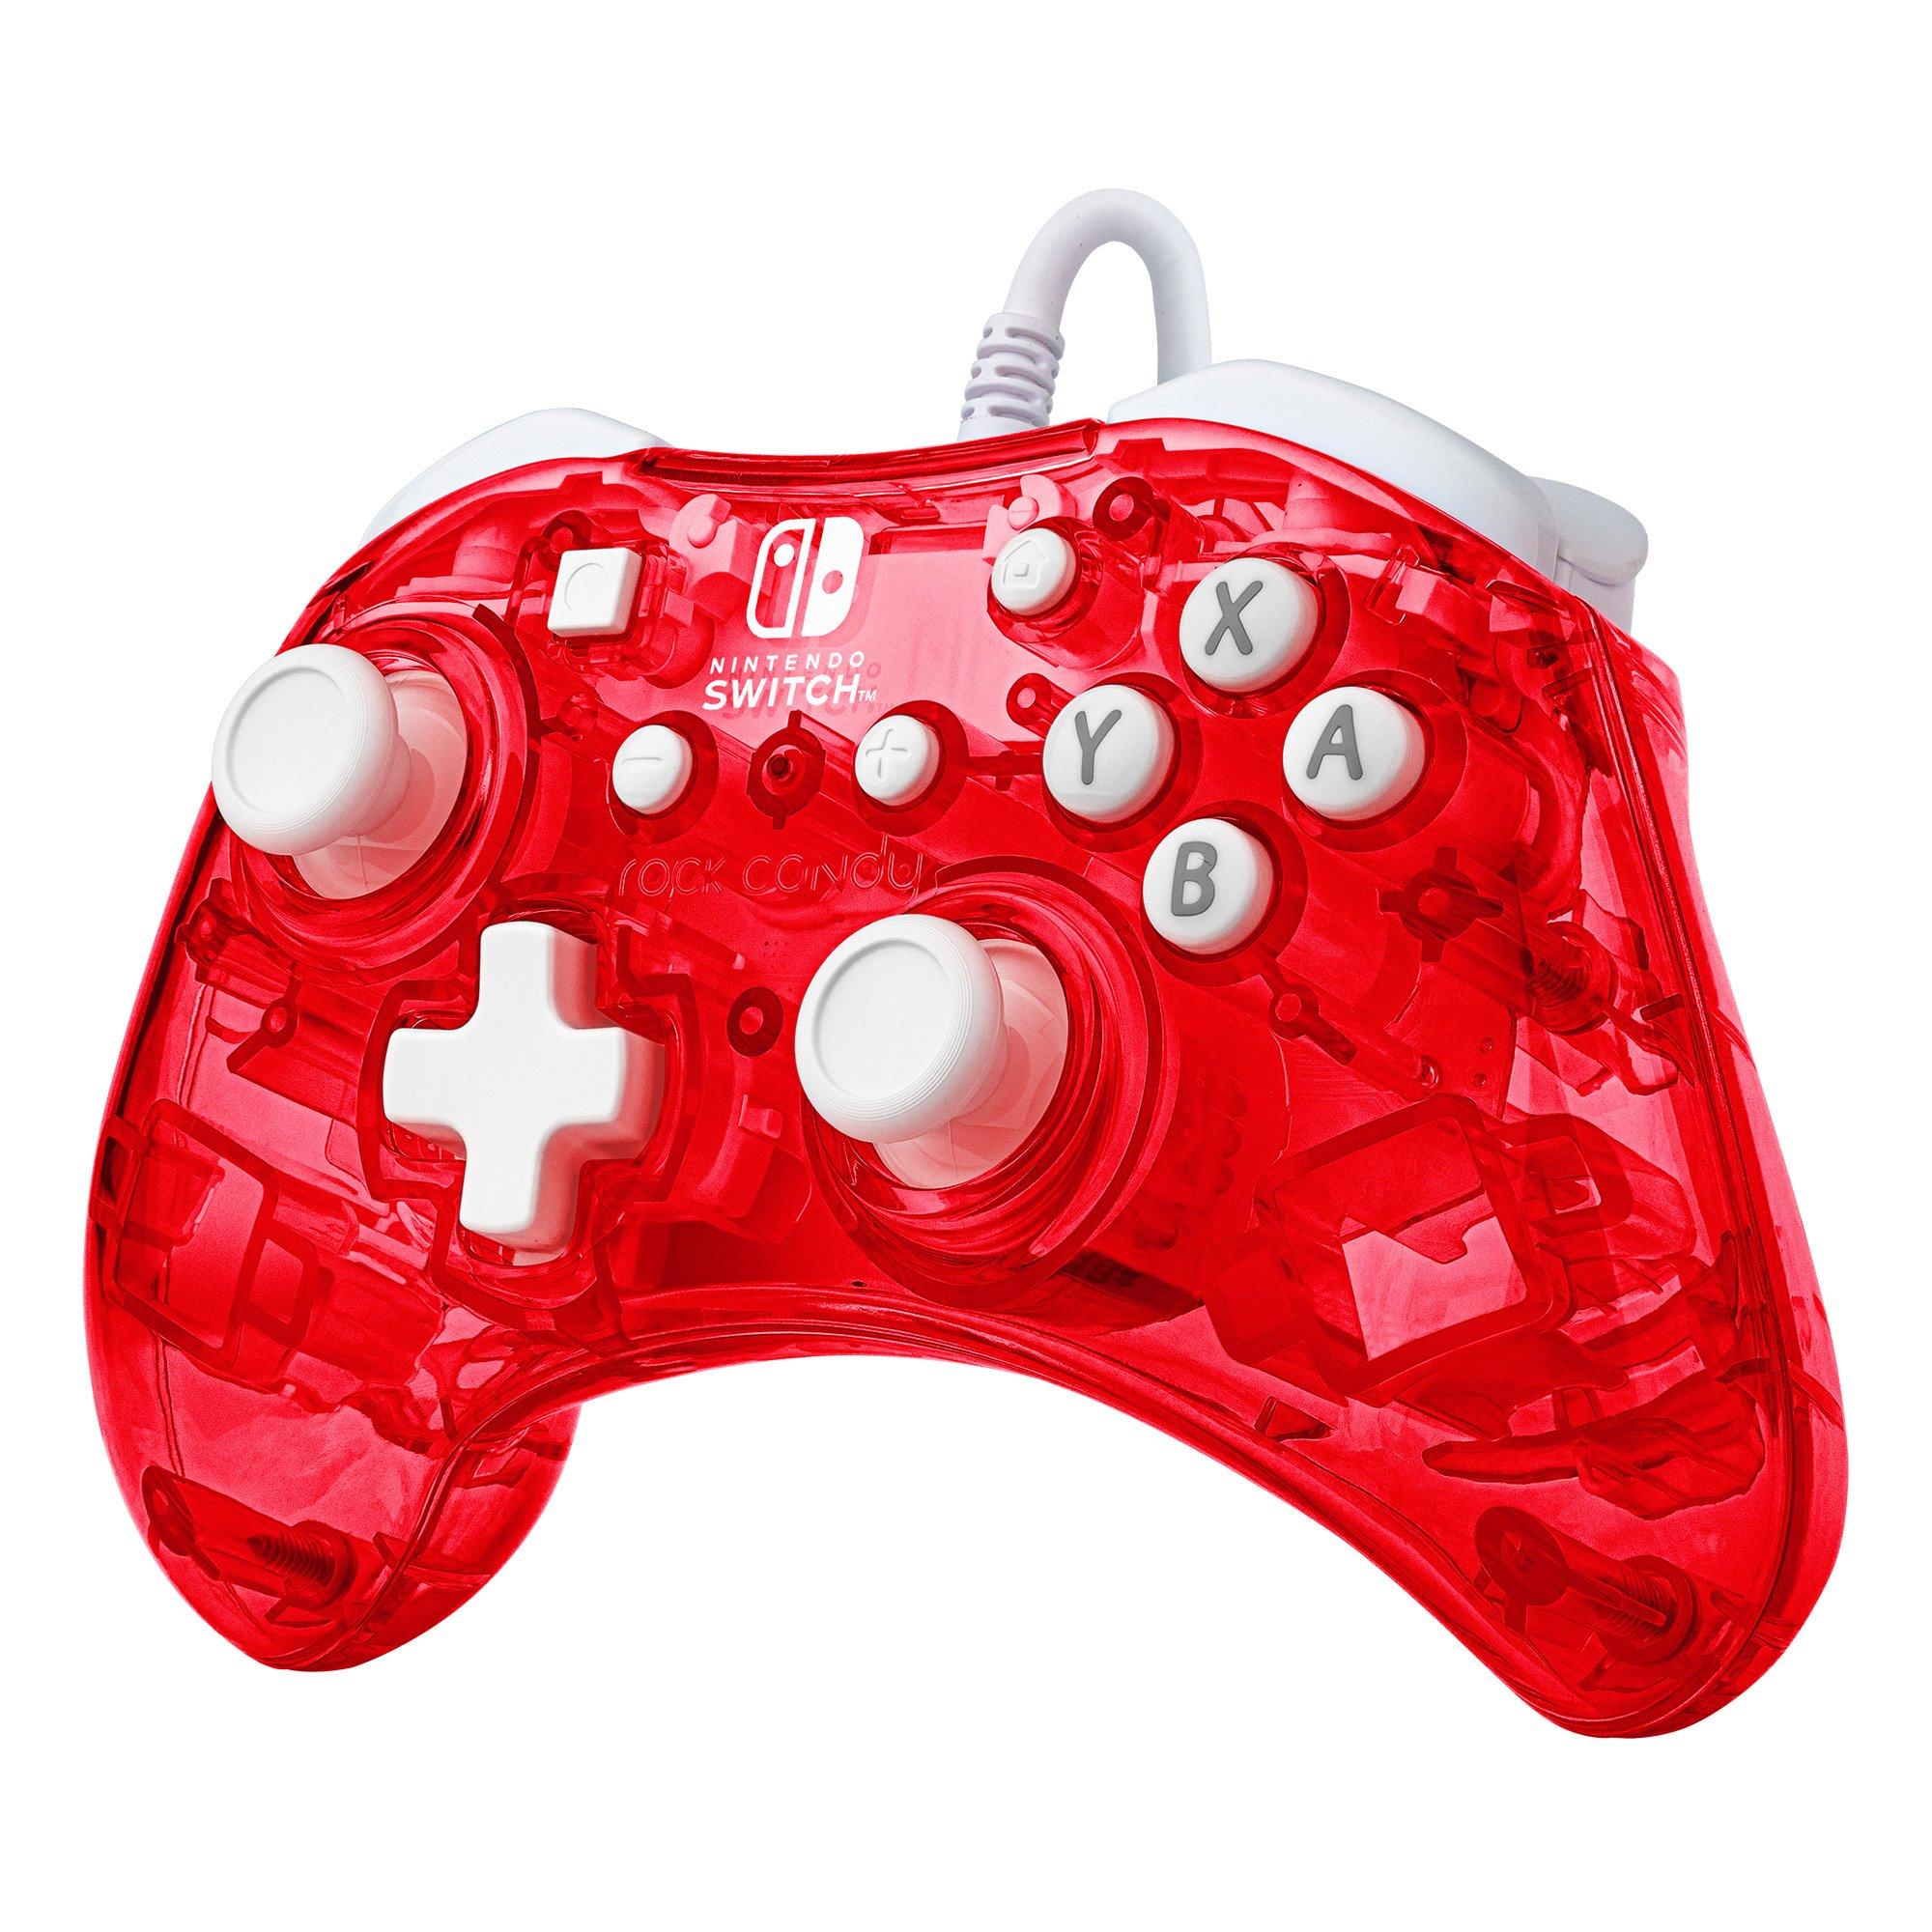 Pdp Rock Candy Wired Controller For Nintendo Switch Stormin Cherry 5682